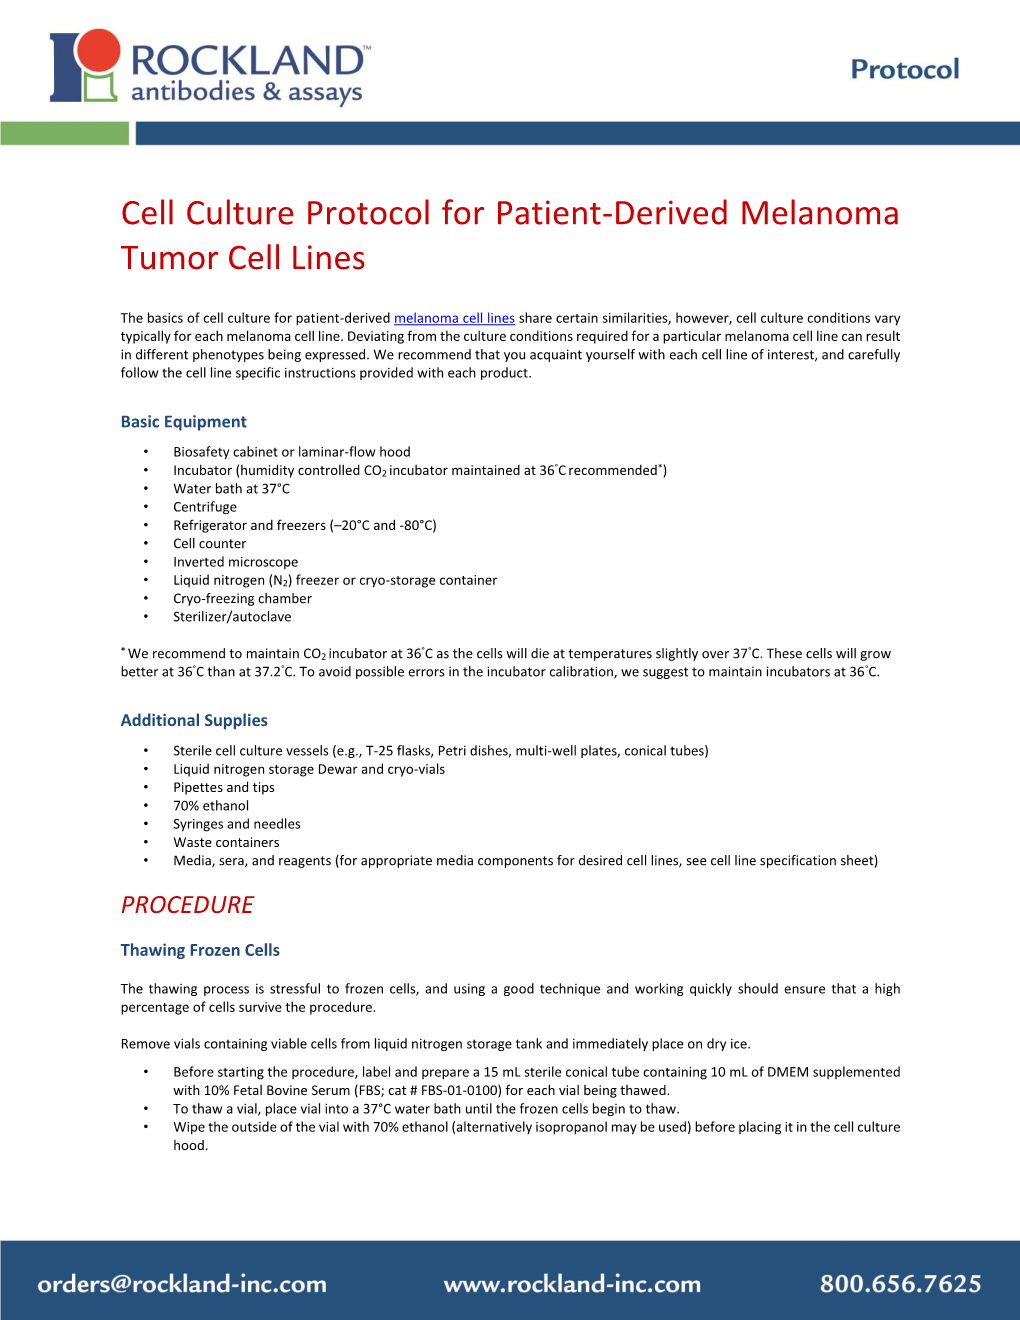 Cell Culture Protocol for Patient-Derived Melanoma Tumor Cell Lines